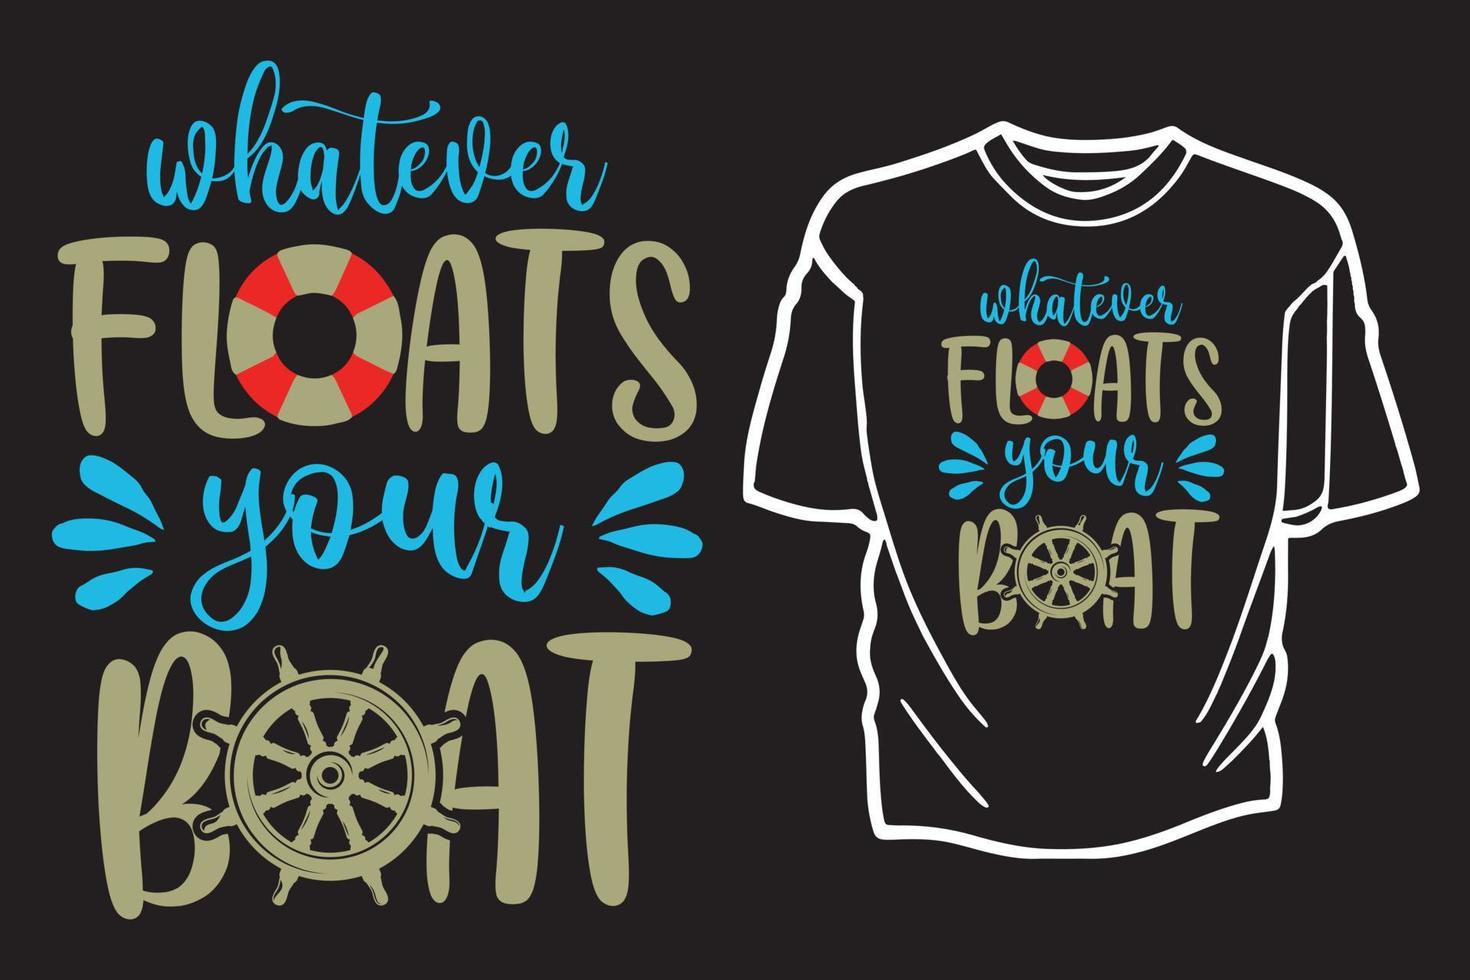 Cruise t shirt design retro vintage typography and lettering art illustration graphic vector